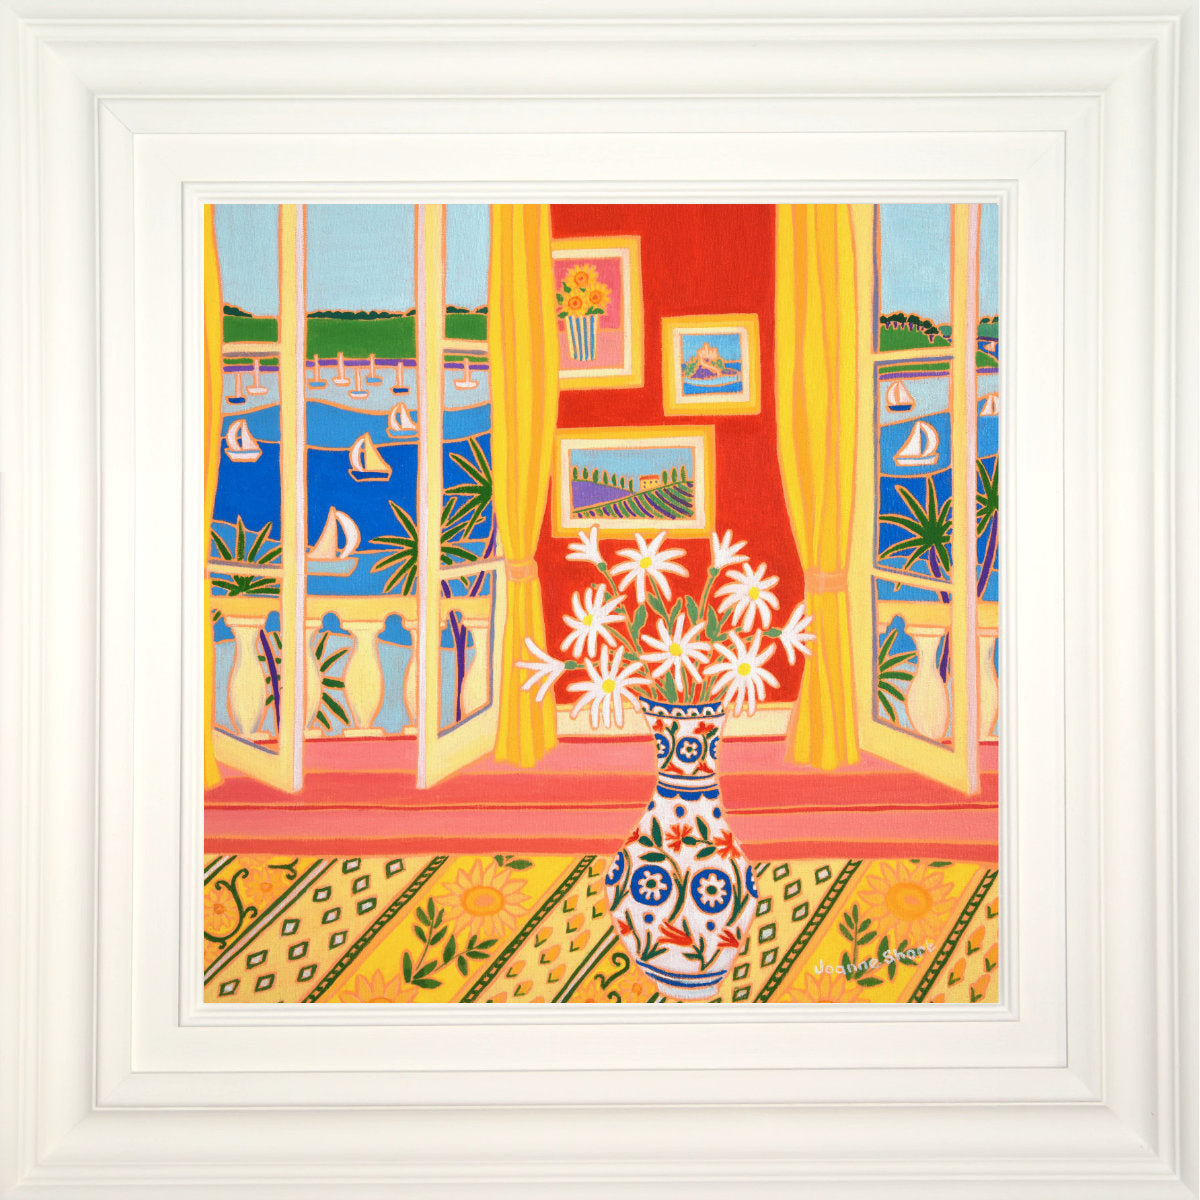 'Paintings on the Wall and Daisies in a Vase, Falmouth River View',  18 x 18 inches, coastal oil on canvas. Painting by Cornish Artist Joanne Short. Cornish Art from our Cornwall Art Gallery